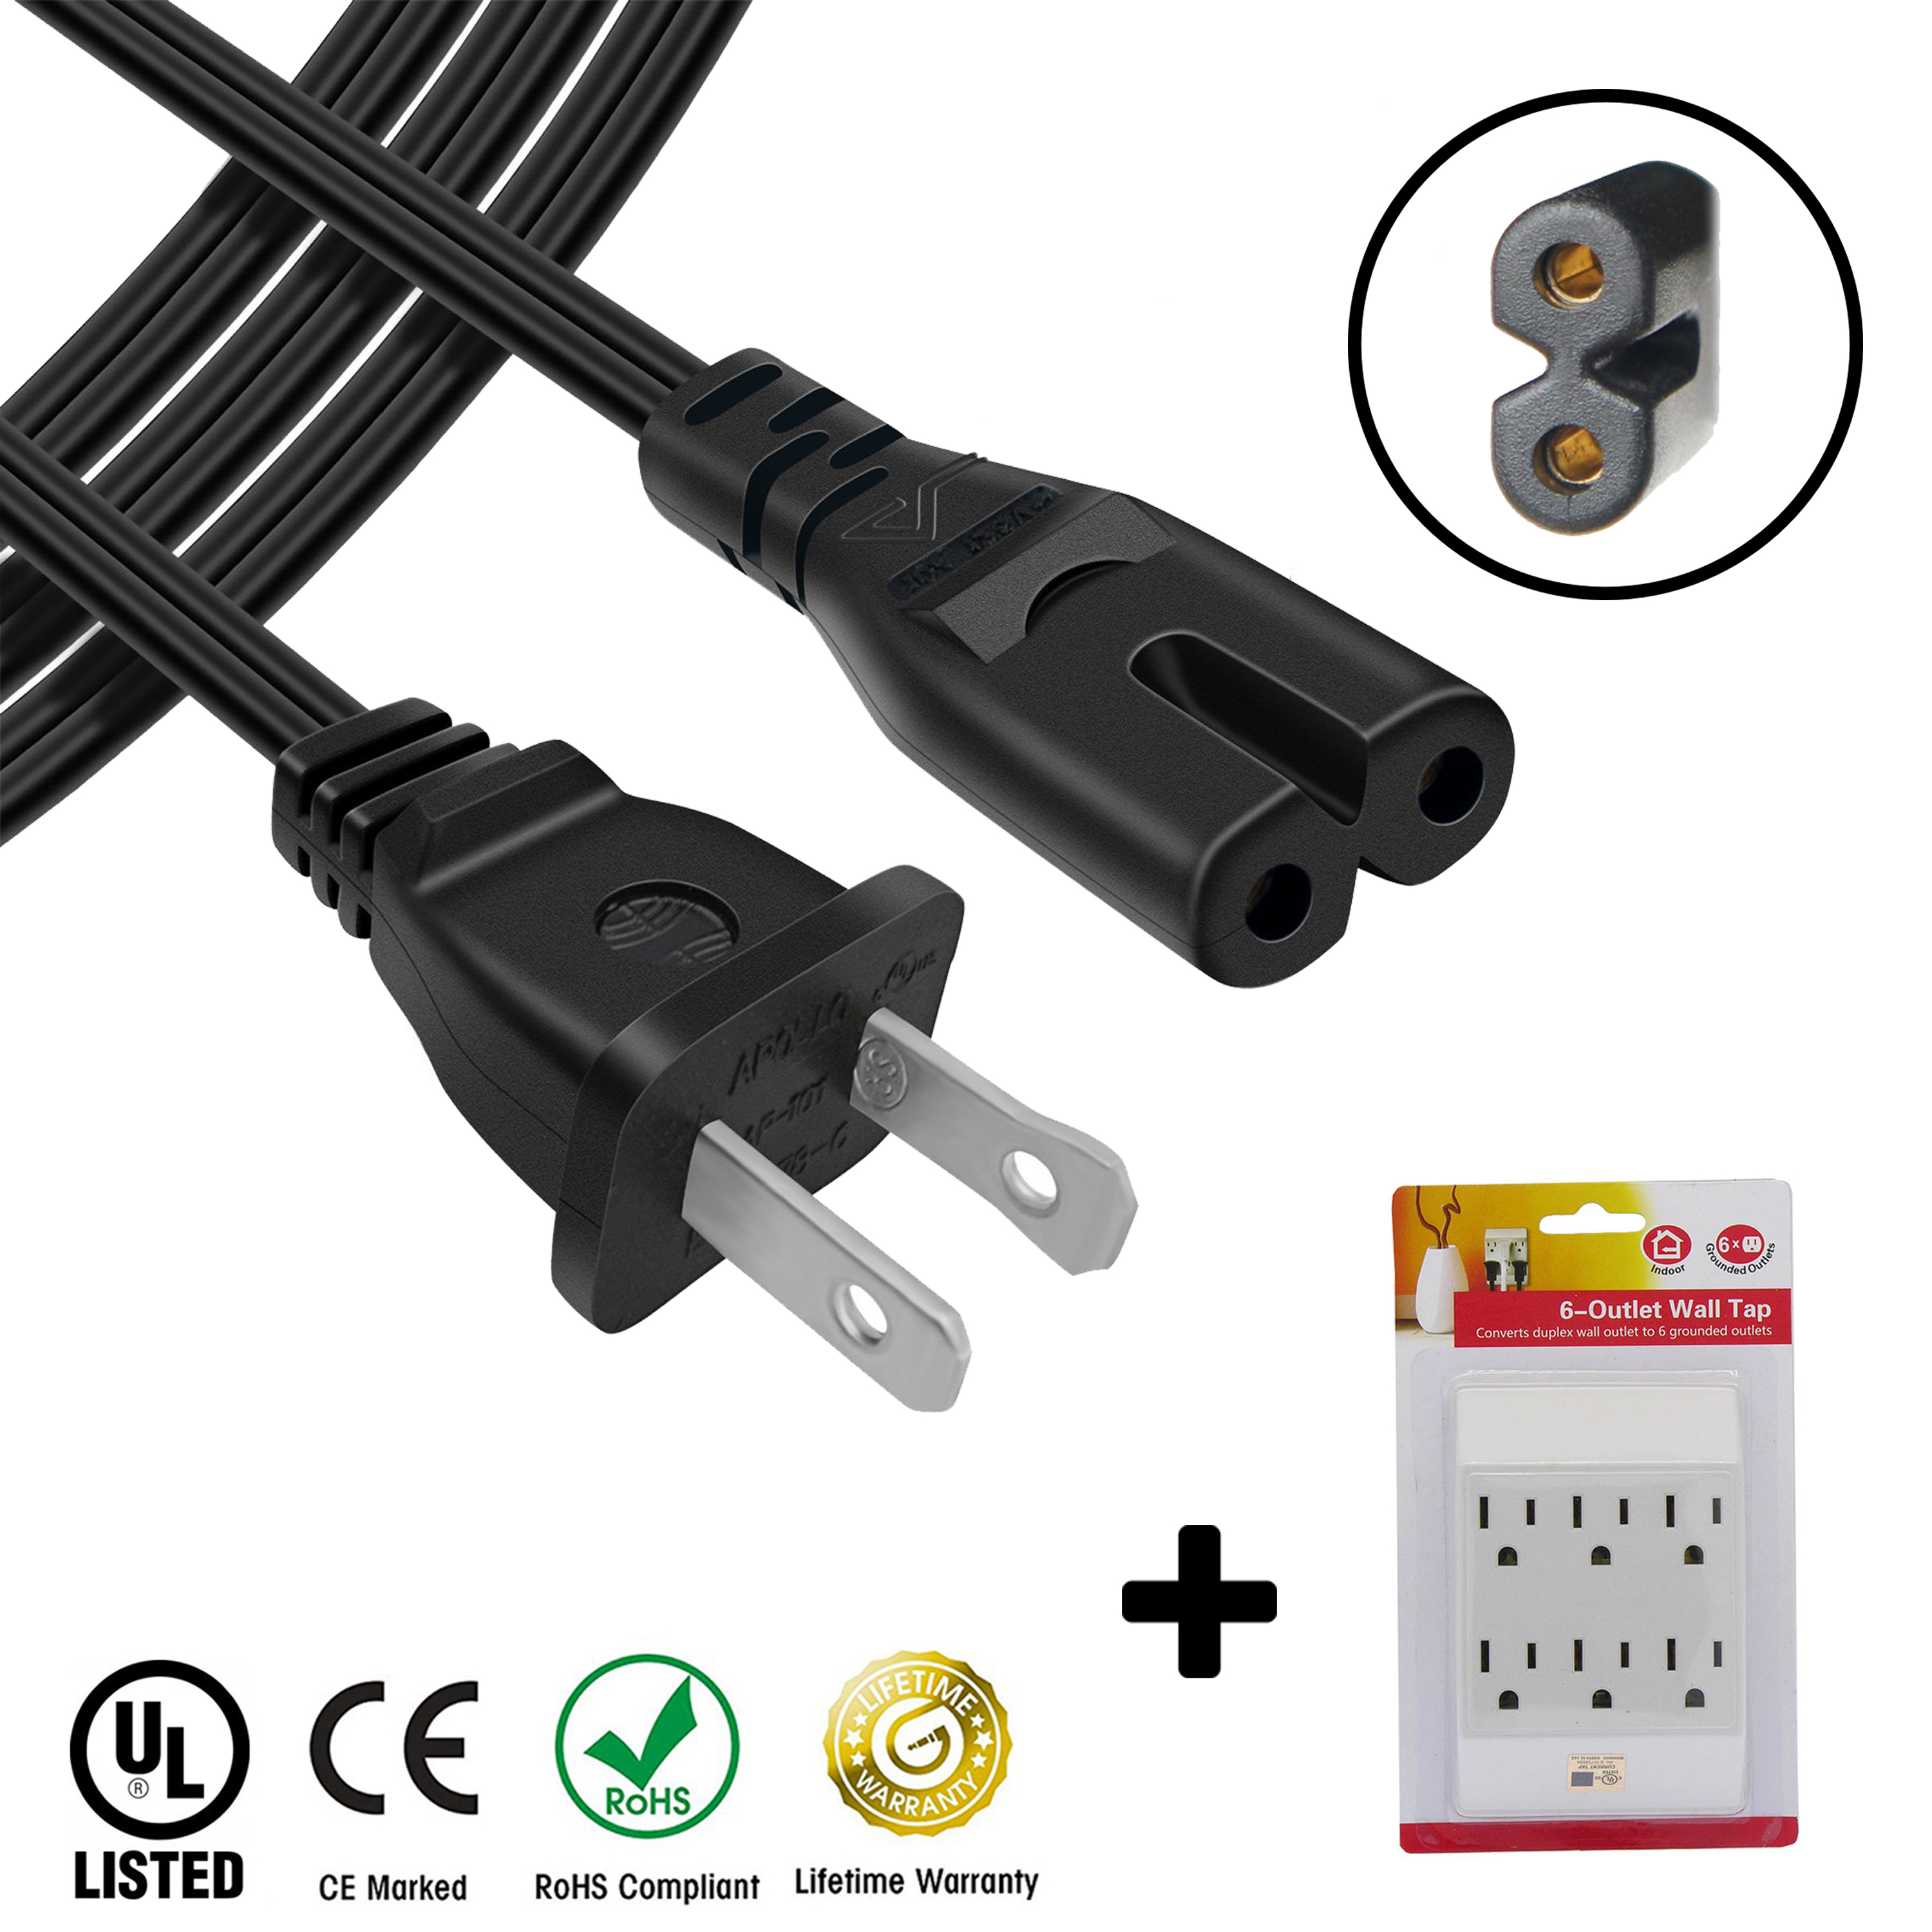 AC Power Cord Cable Plug for Tannoy Reveal 501A 601a 6D 8D Studio Monitor speaker PLUS 6 Outlet Wall Tap - 8 ft - image 1 of 1